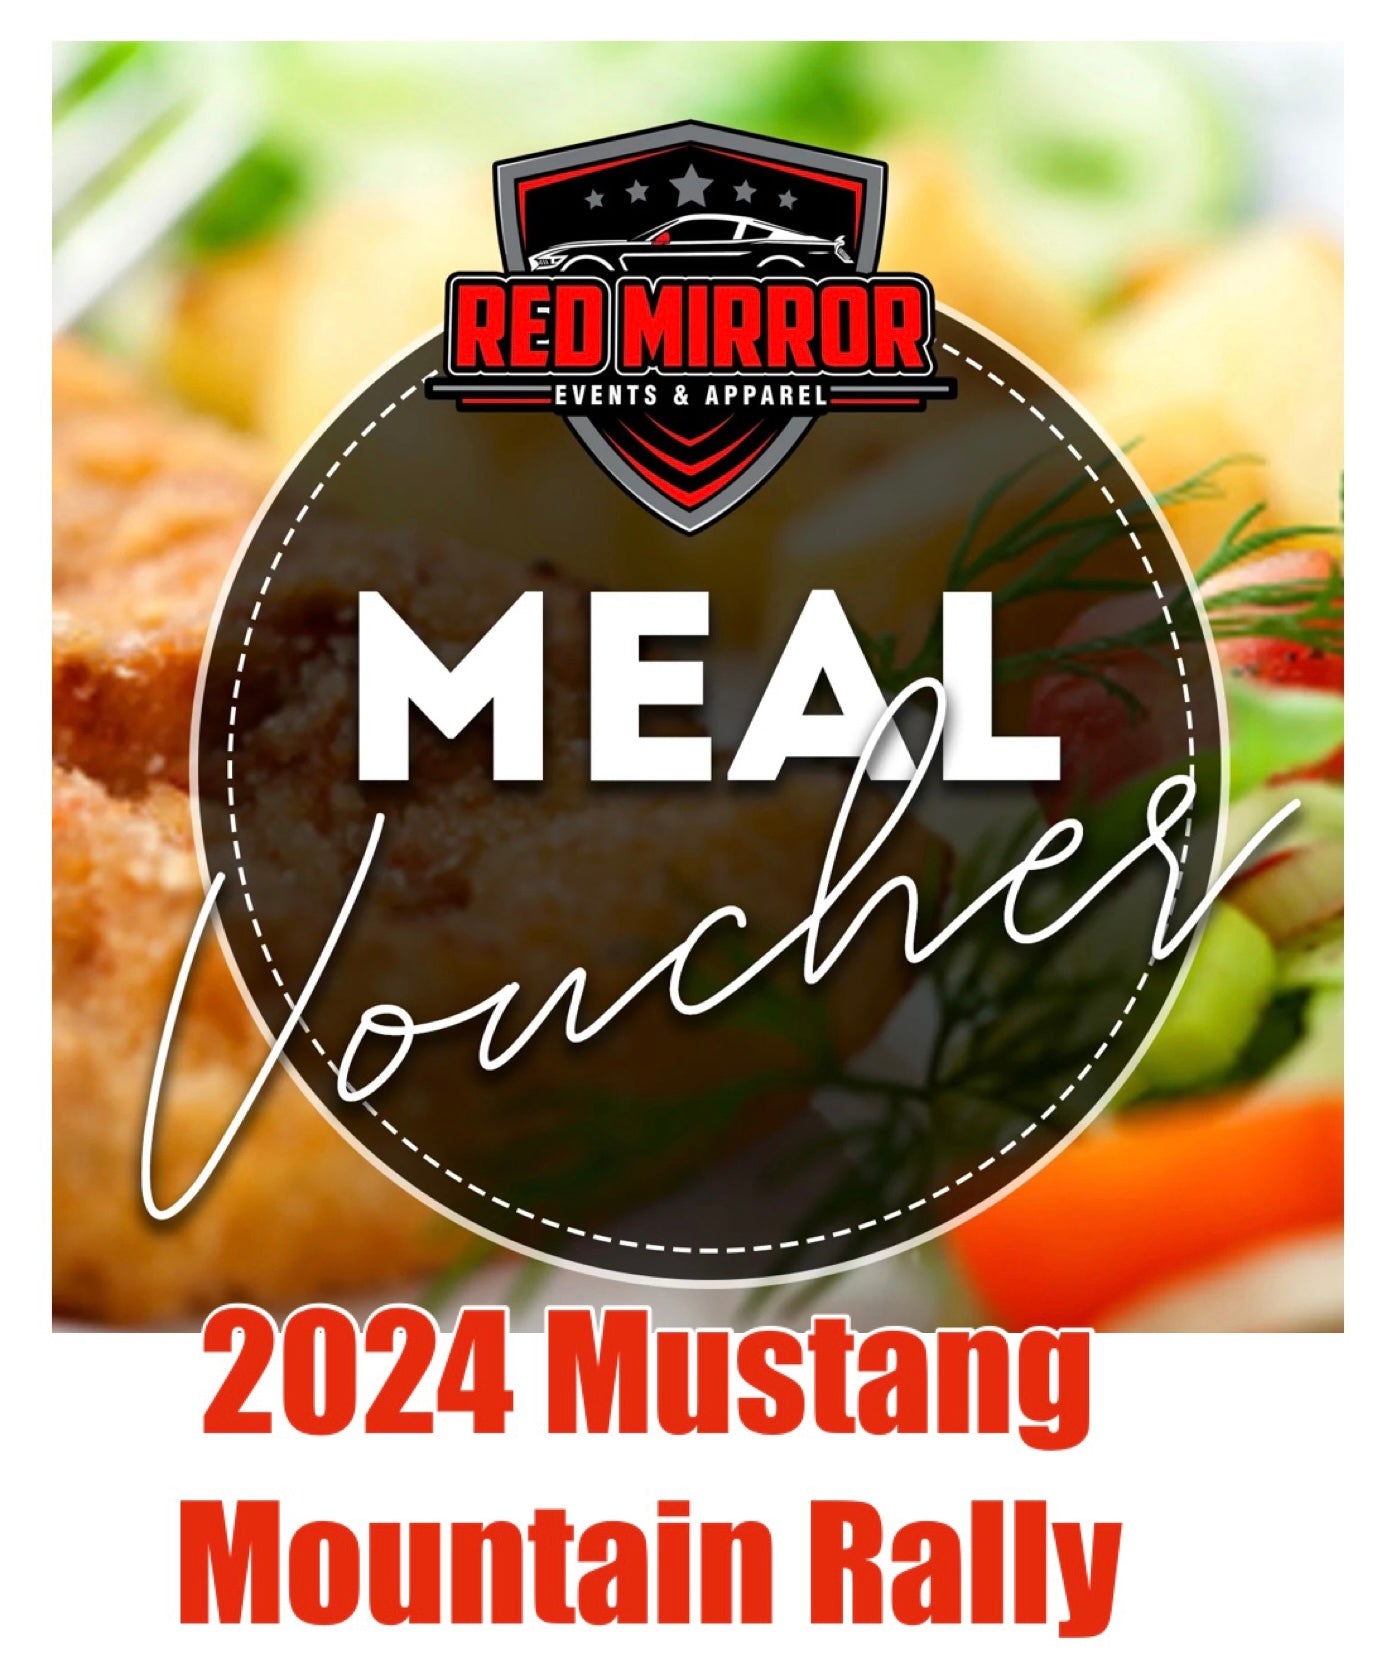 2024 Mustang Mountain Rally - Meal Voucher